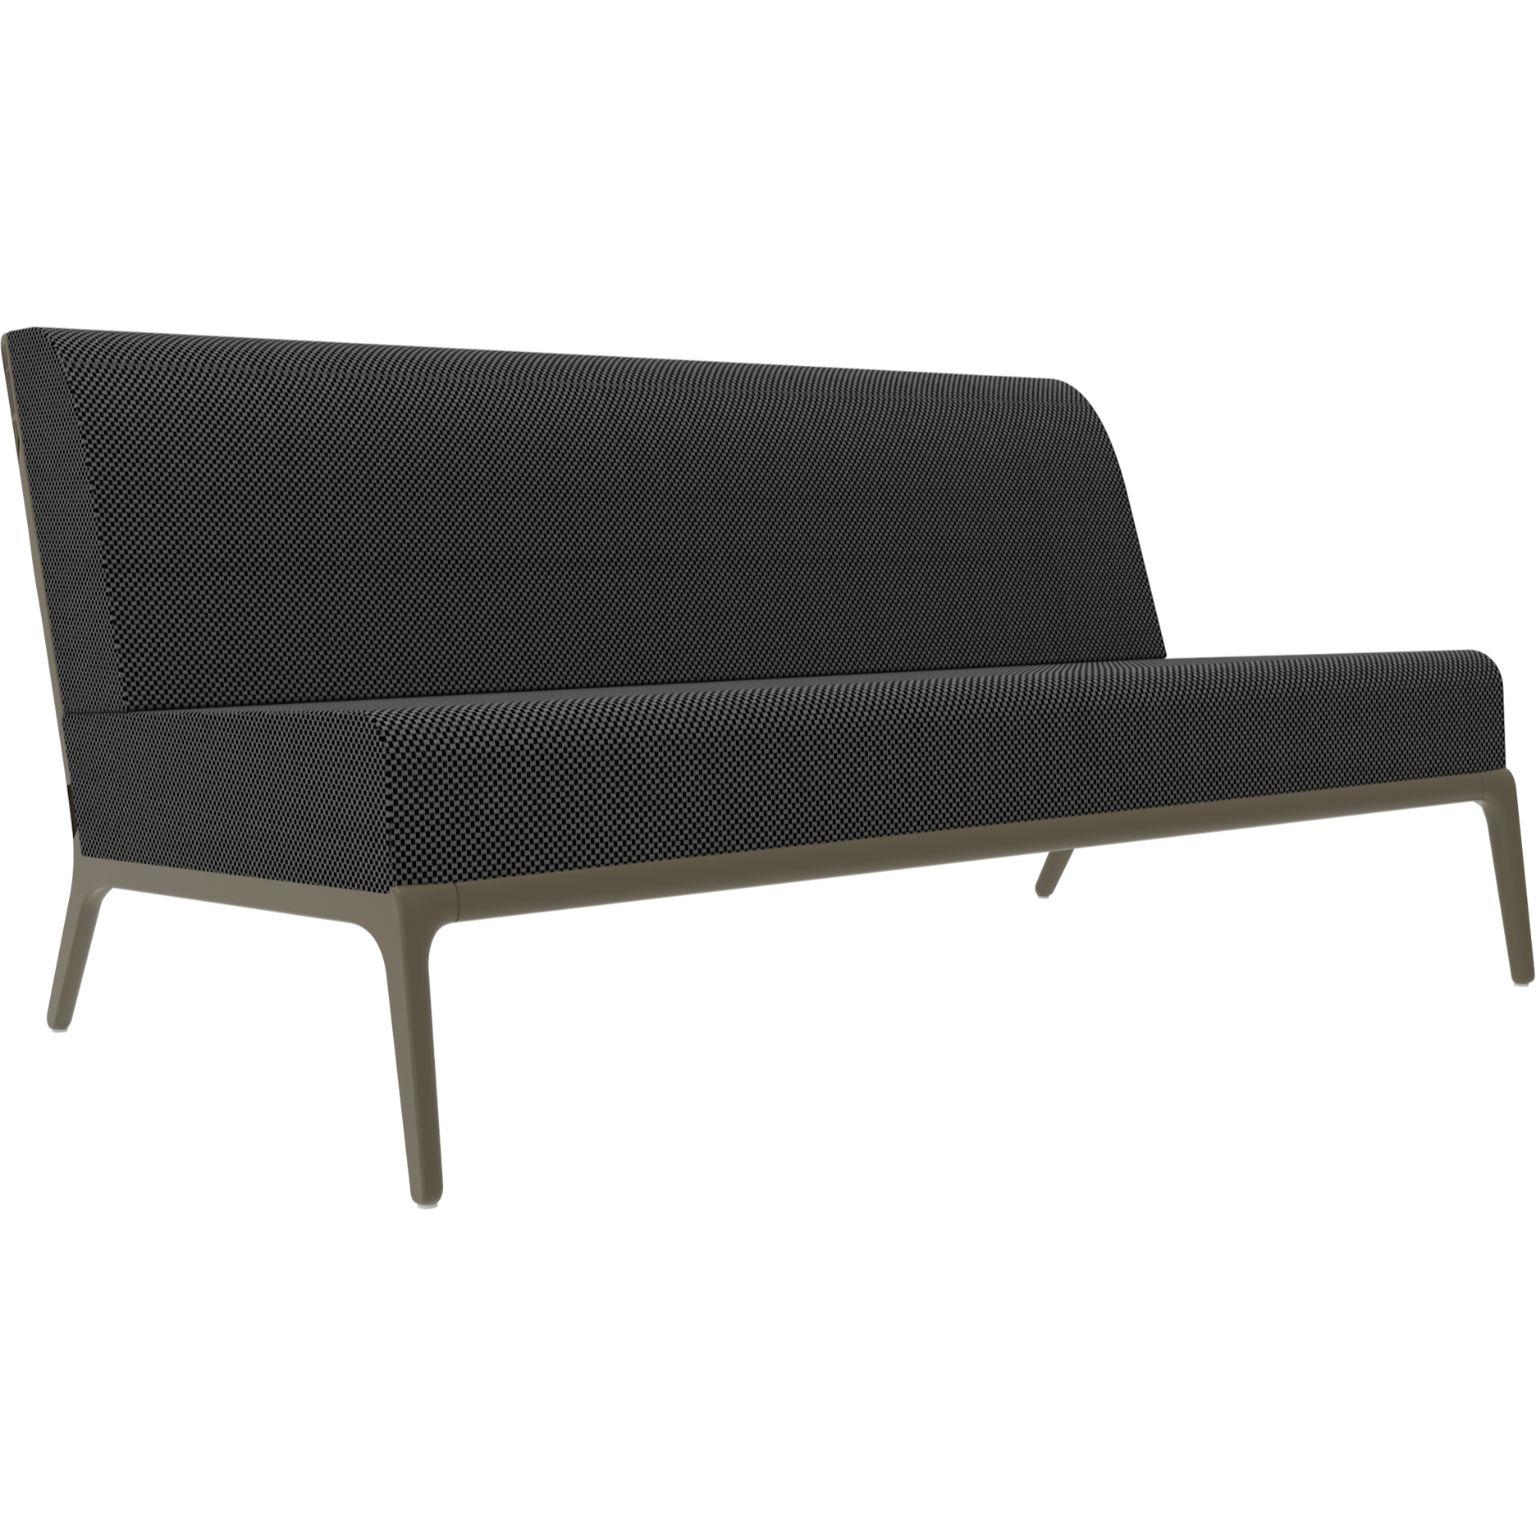 Xaloc Central 160 Bronze Modular sofa by MOWEE
Dimensions: D100 x W160 x H81 cm (Seat Height 42cm)
Material: Aluminium, Textile
Weight: 35.5 kg
Also Available in different colors and finishes. 

 Xaloc synthesizes the lines of interior